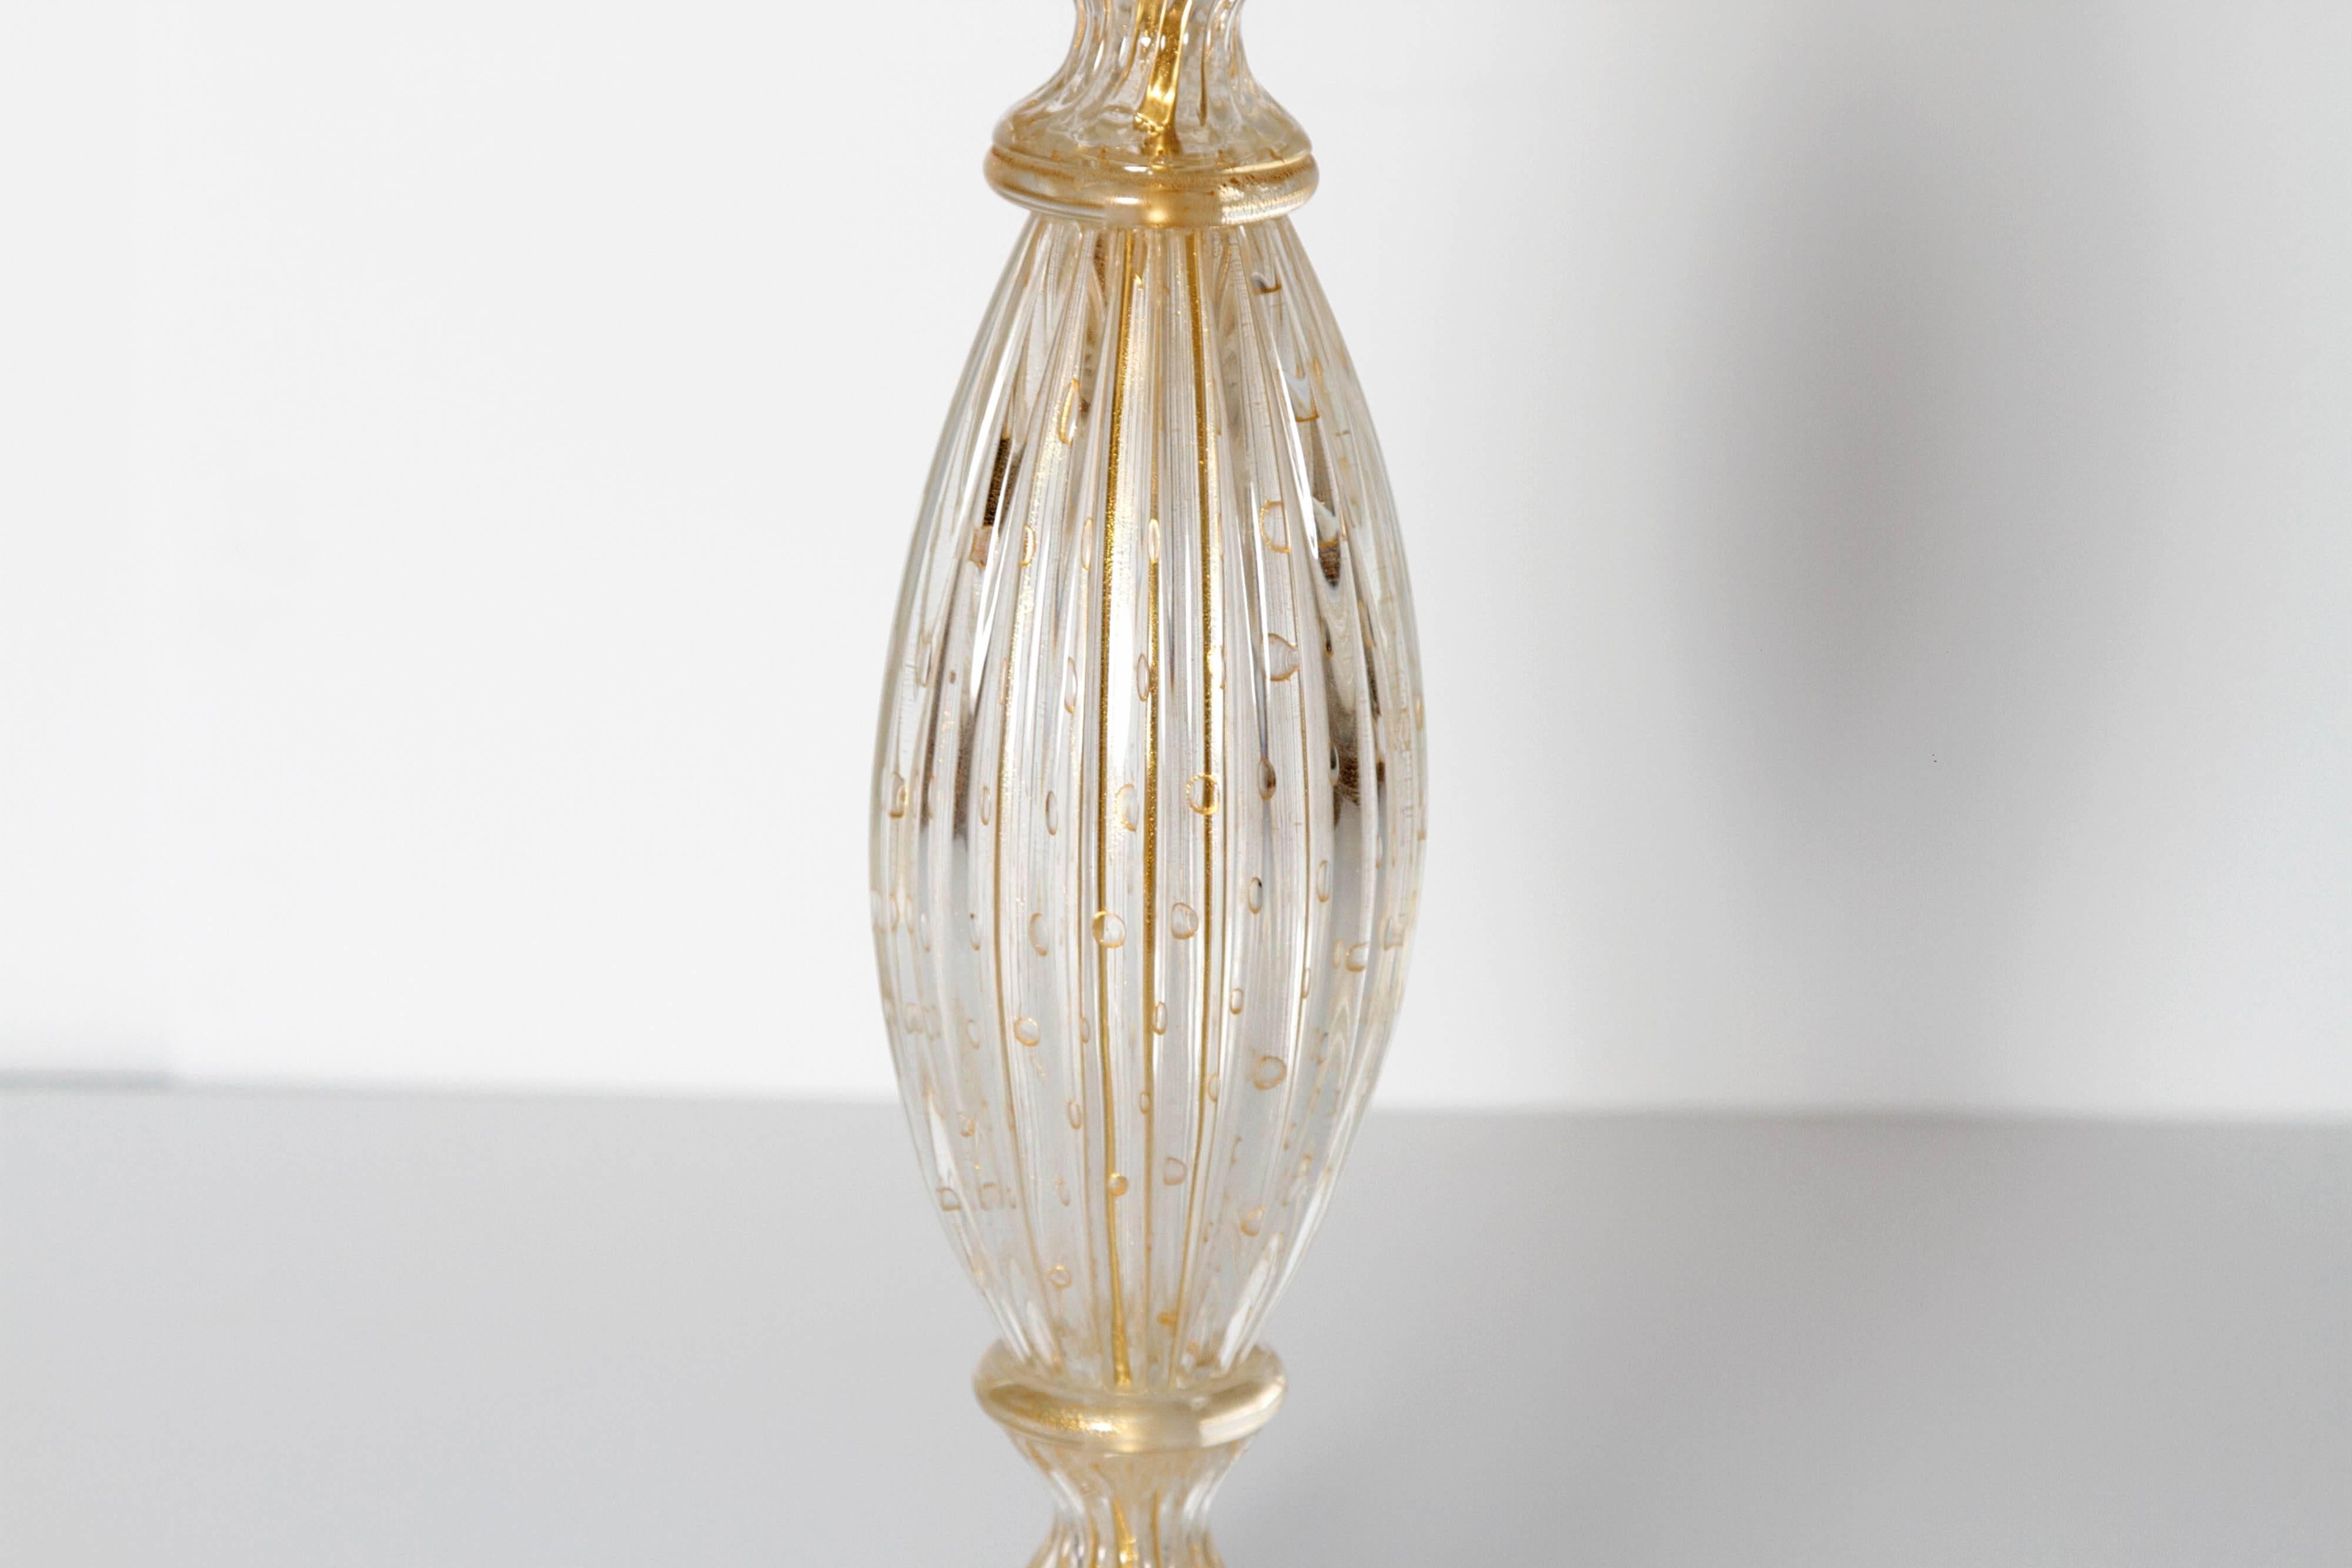 Hand-Crafted Mid-Century Modern Murano Lamp Attributed to Barovier & Toso